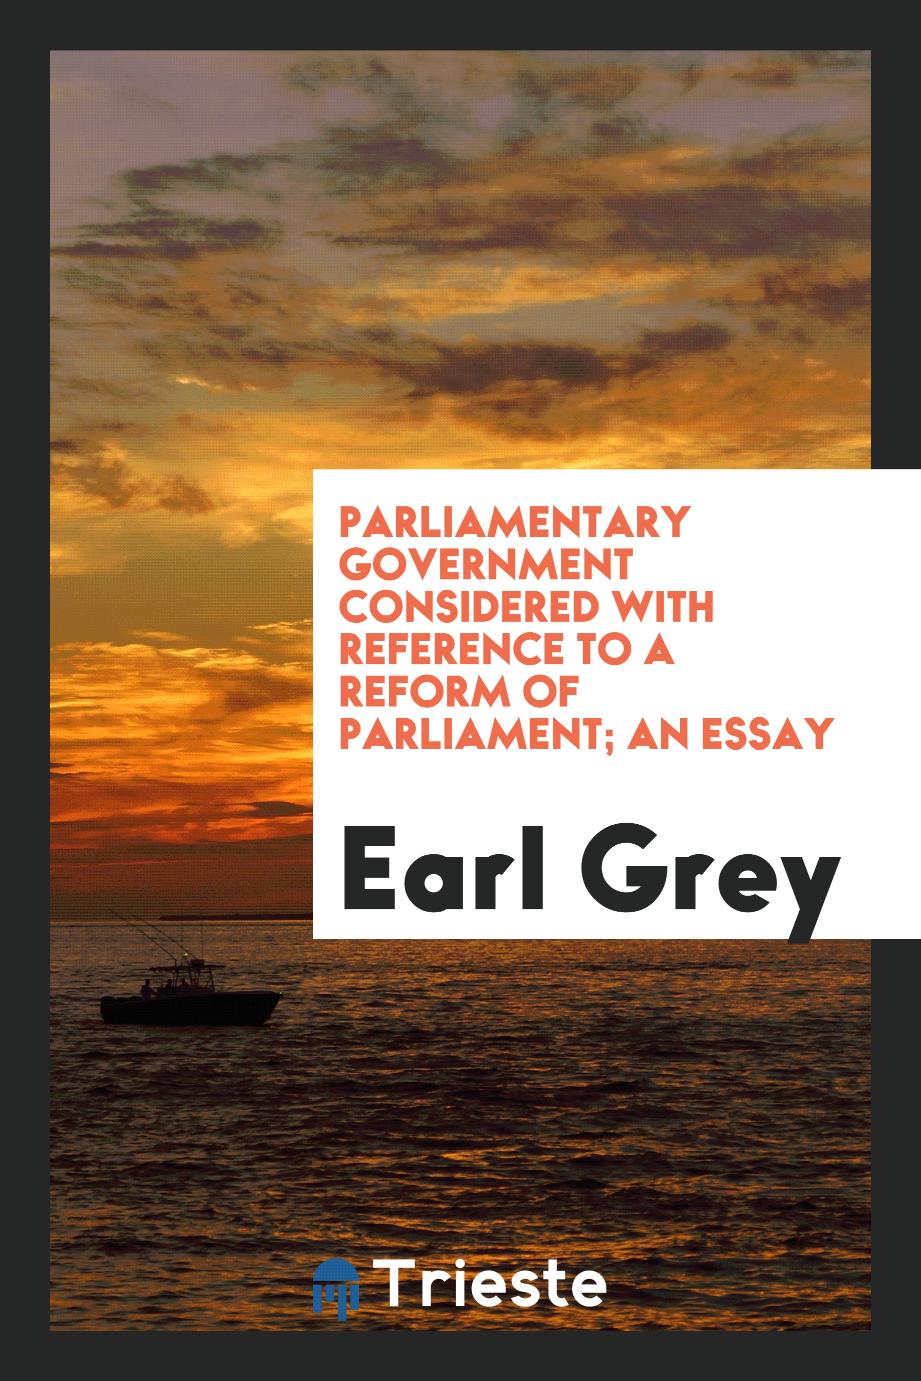 Parliamentary government considered with reference to a reform of Parliament; an essay